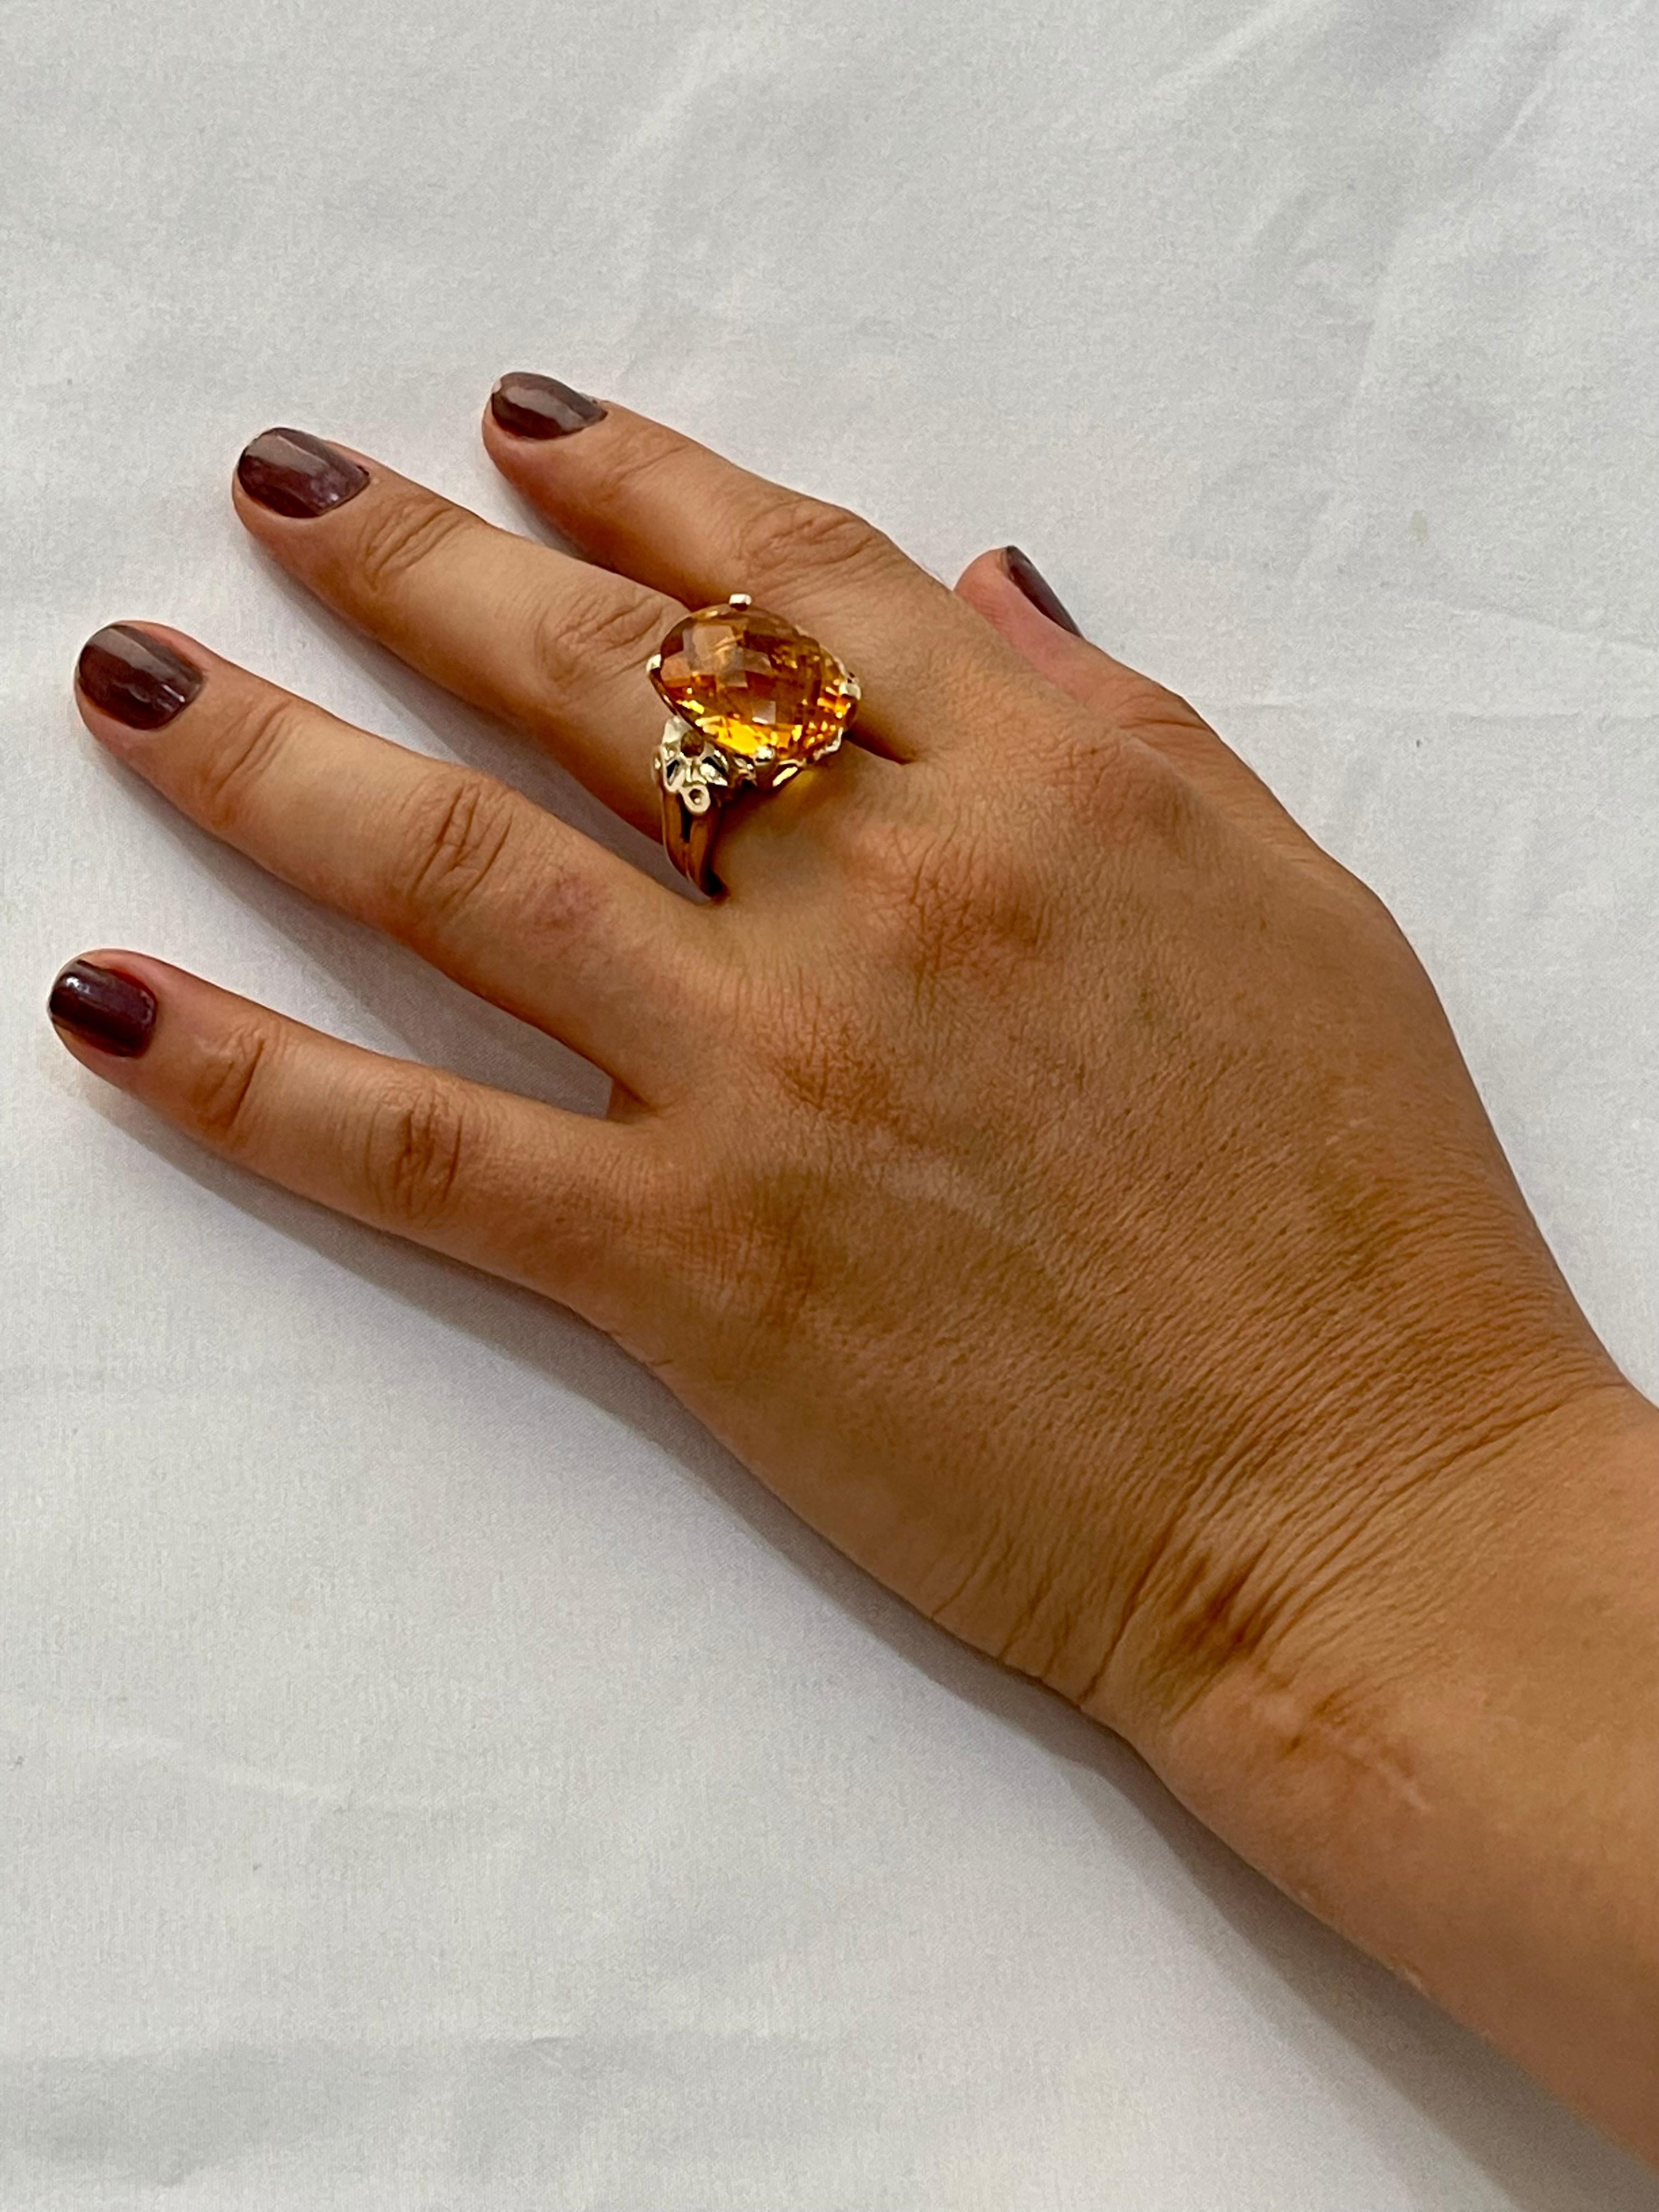 22 Carat Natural Oval Citrine Cocktail Ring in 14 Karat Yellow Gold, Estate For Sale 7